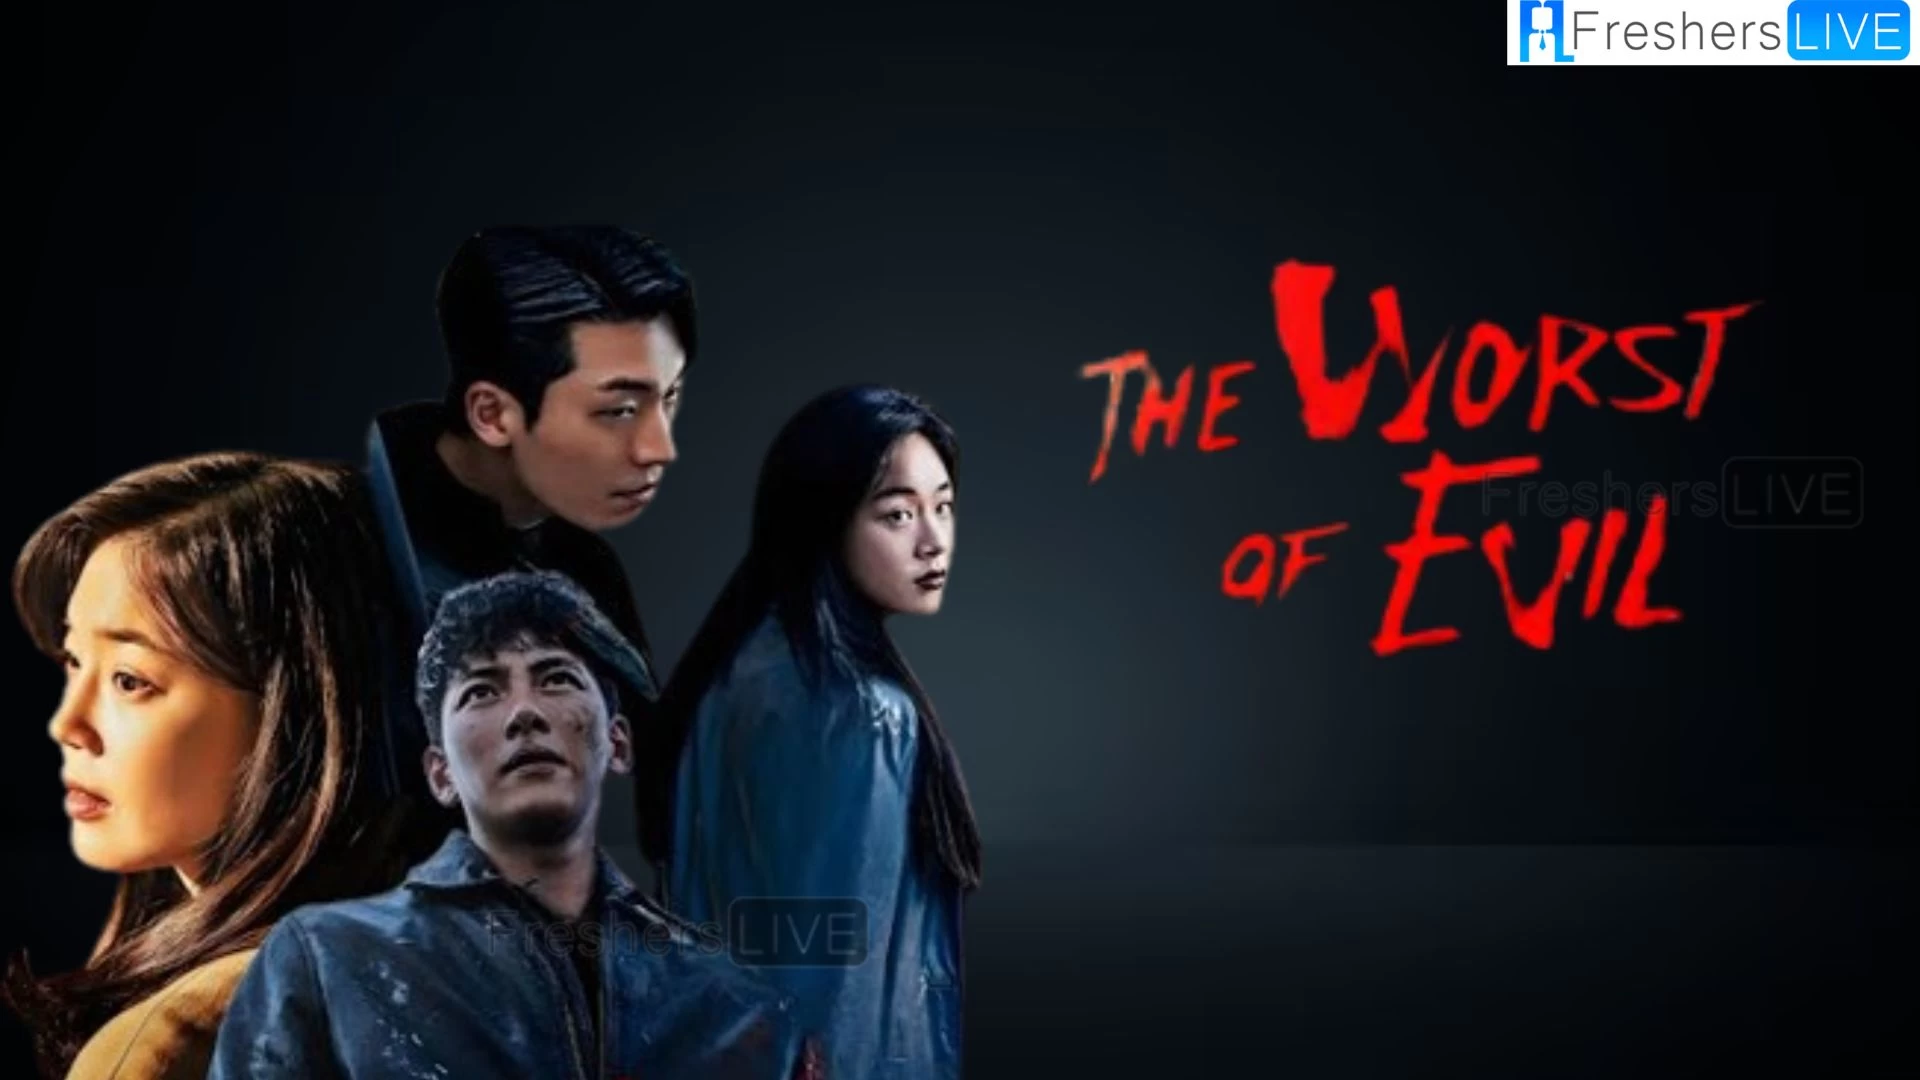 The Worst Of Evil Episode 2 Ending Explained, Release Date, Cast, Plot, Where to Watch and More